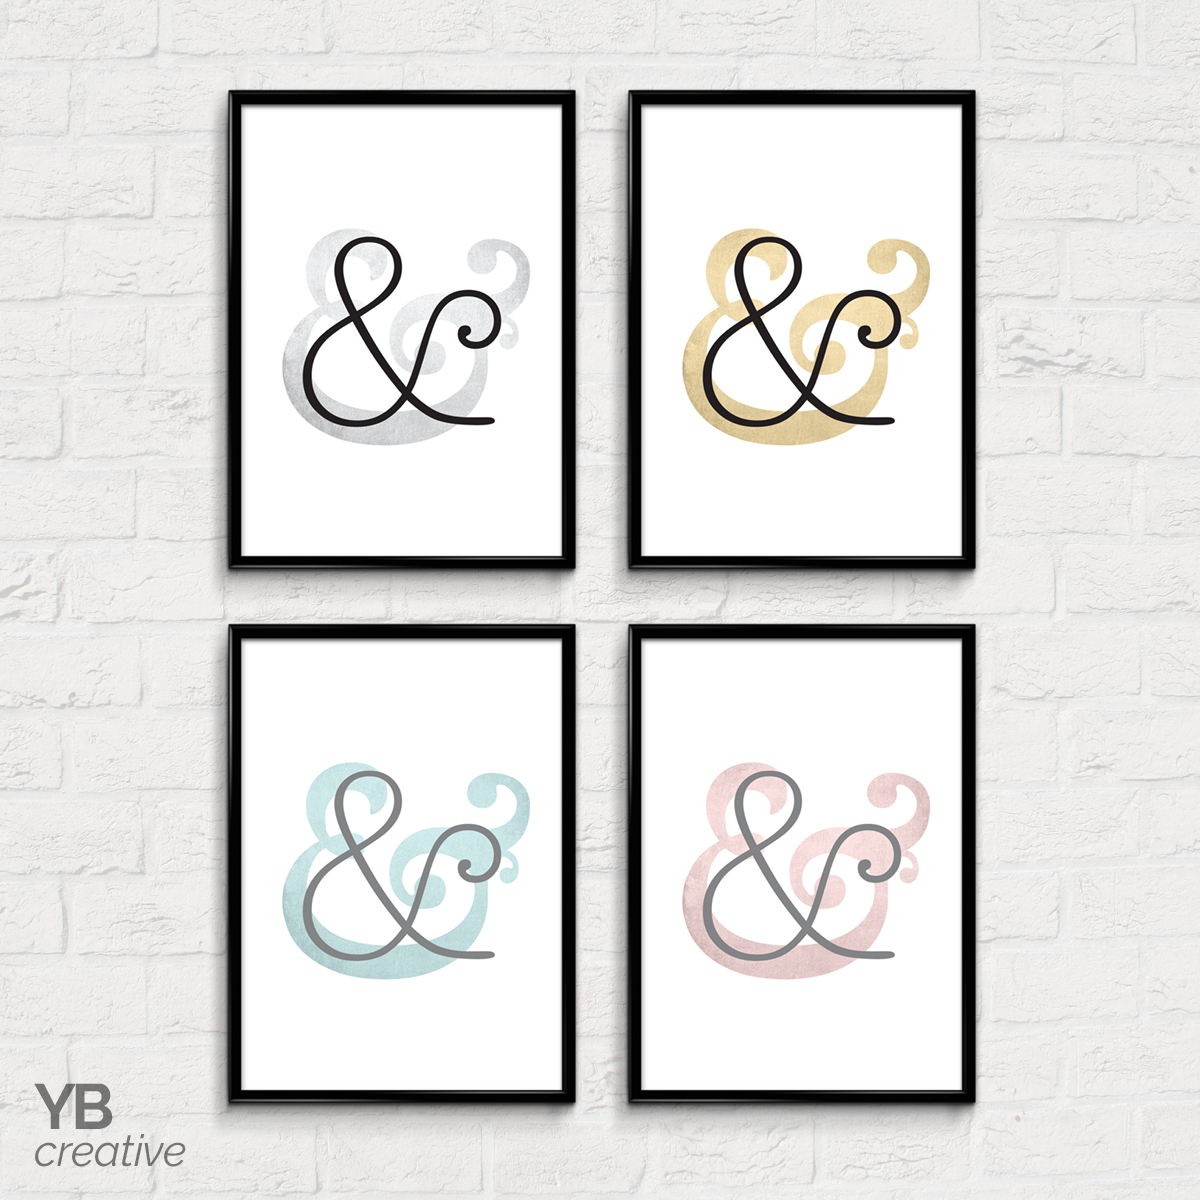 YBcreative Ampersands OPTIONS